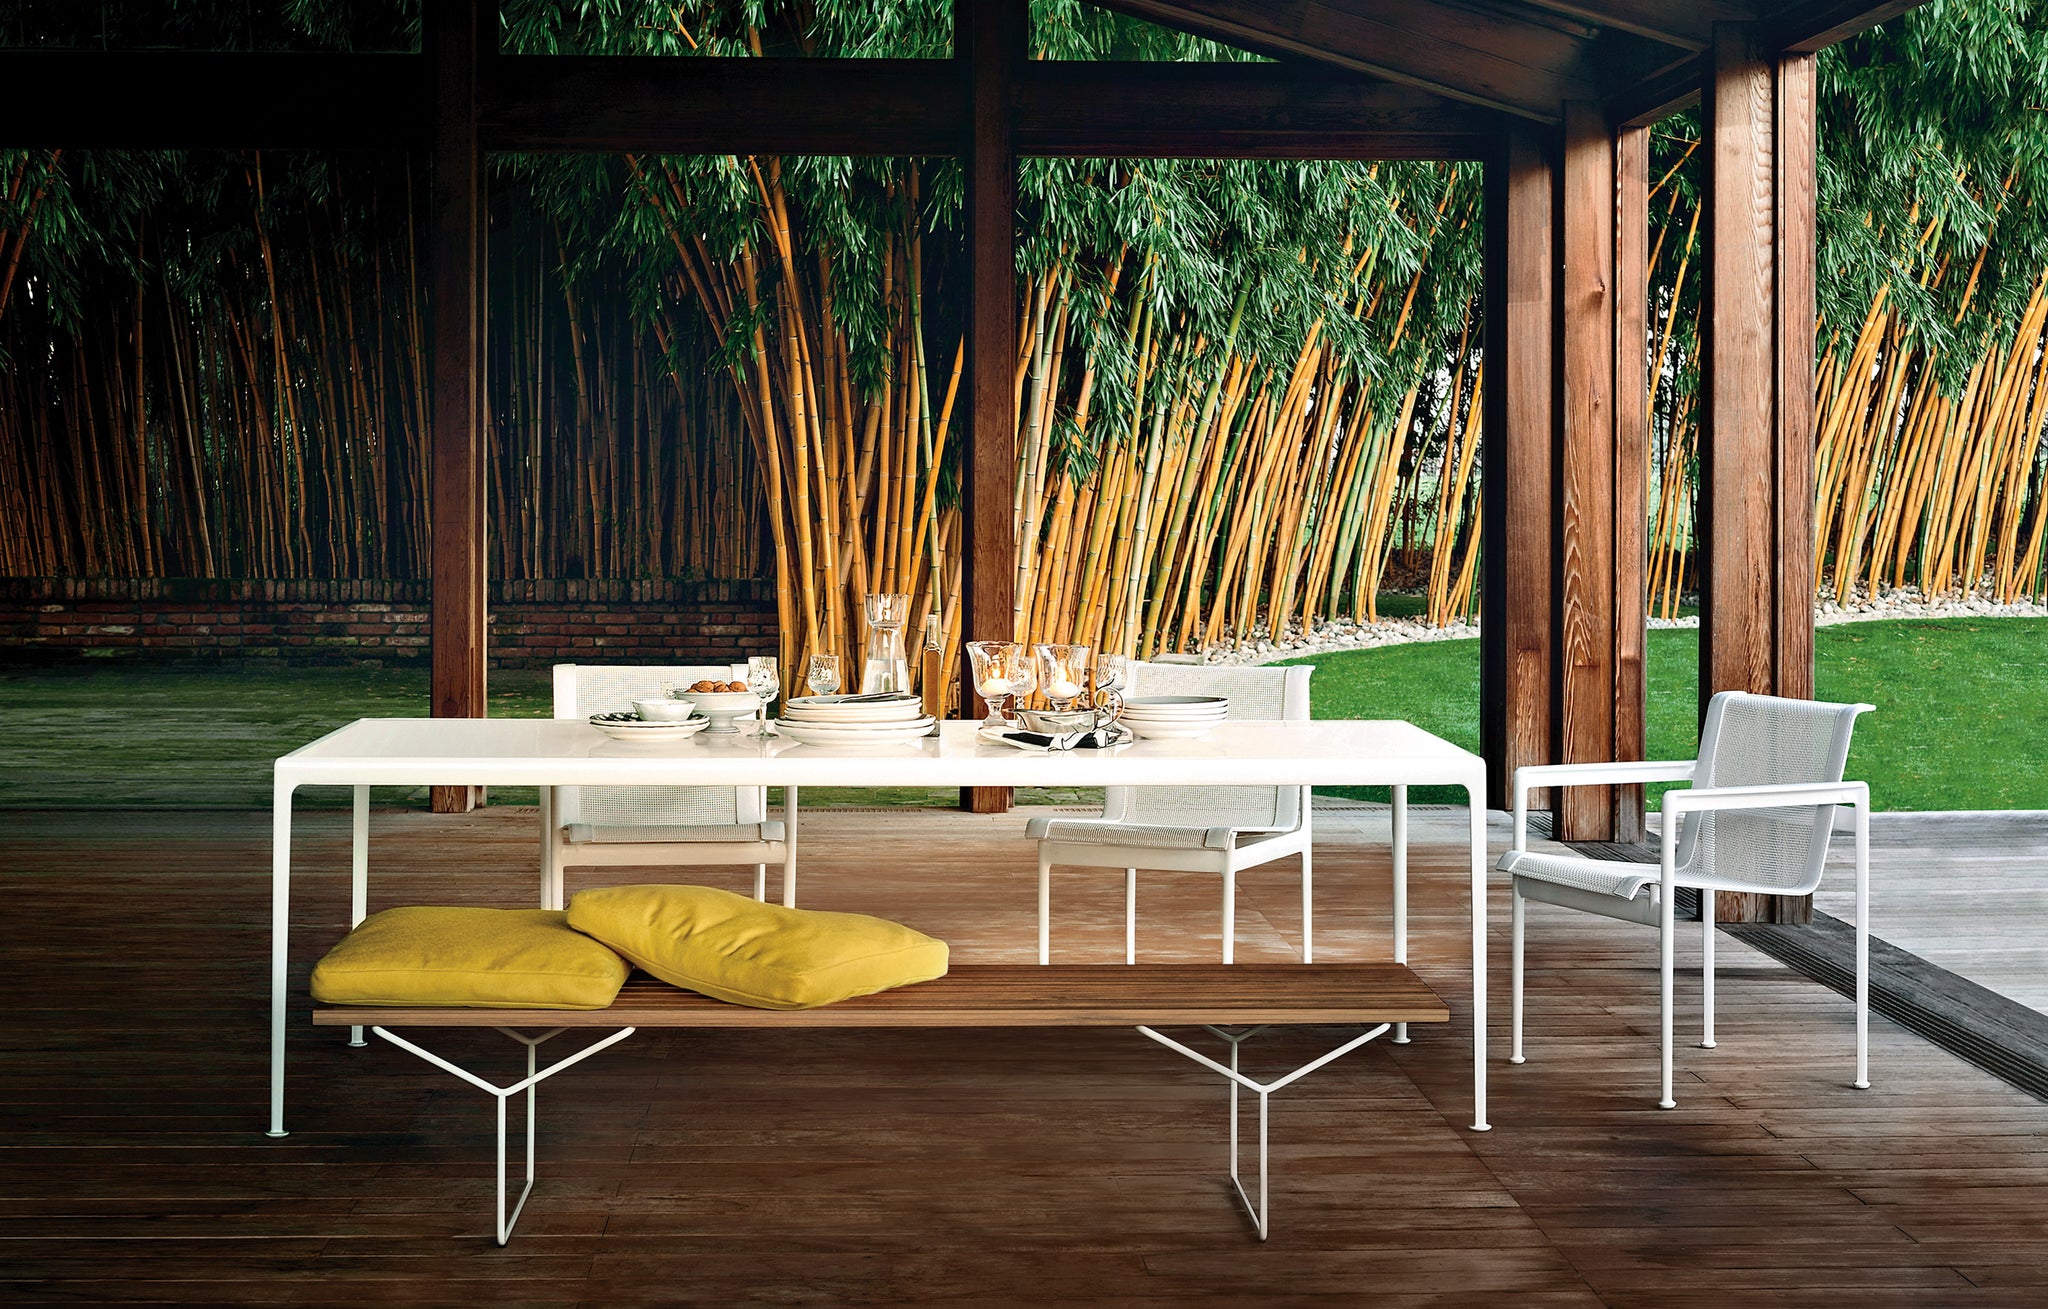 Knoll Outdoor Chairs and Bench around an Outdoor Table on Porch